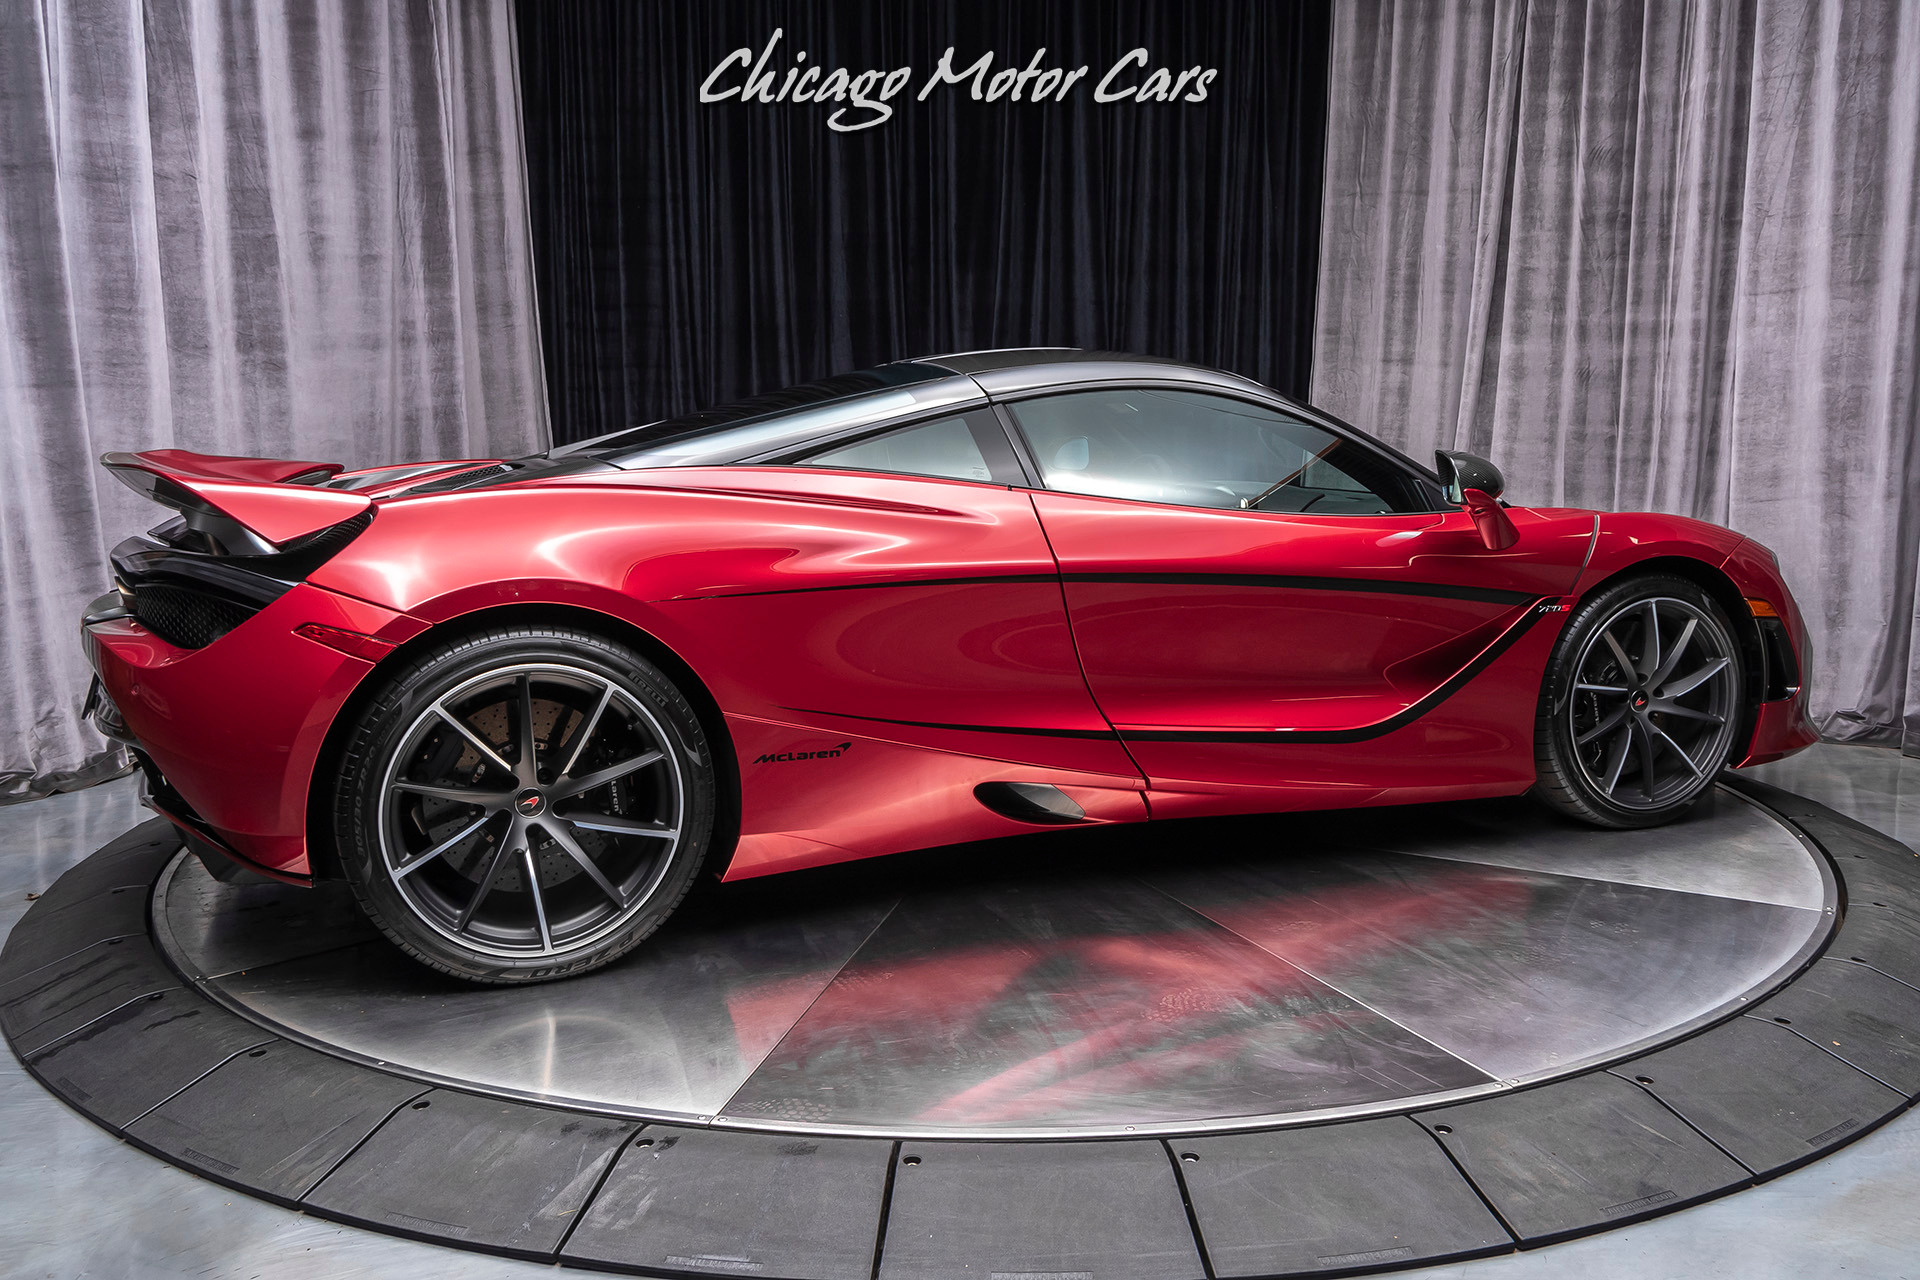 Used-2018-McLaren-720S-Performance-Coupe-MSRP-345K-THOUSANDS-IN-FACTORY-OPTIONS